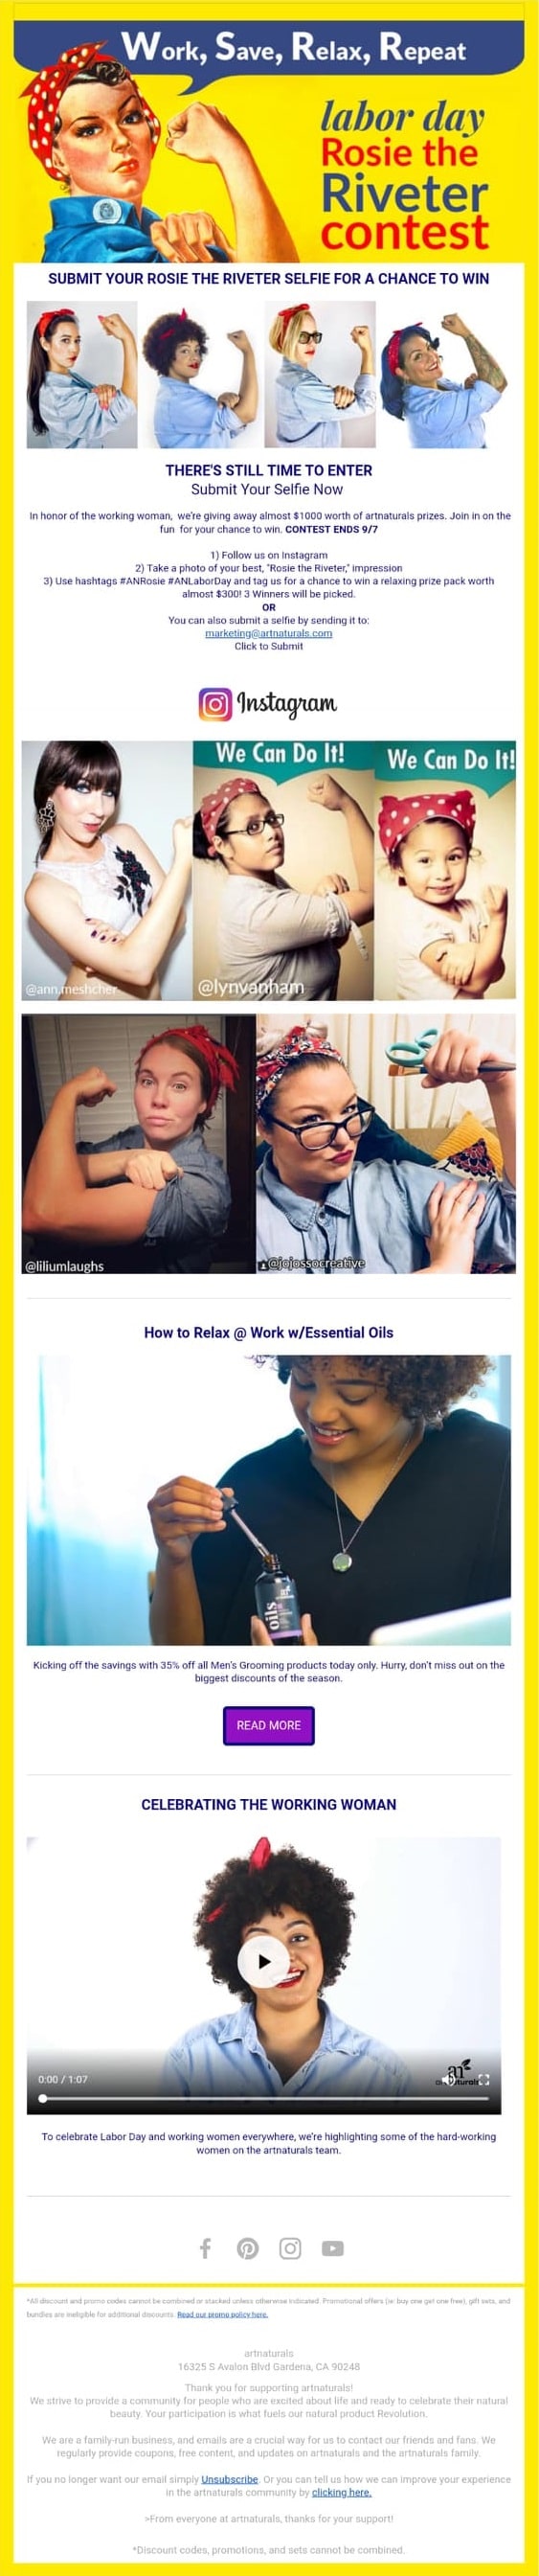 Instead of this being a purely promotional piece, Art Naturals decided to use this holiday to send a helpful newsletter that focuses on relaxation and celebrating working women.  